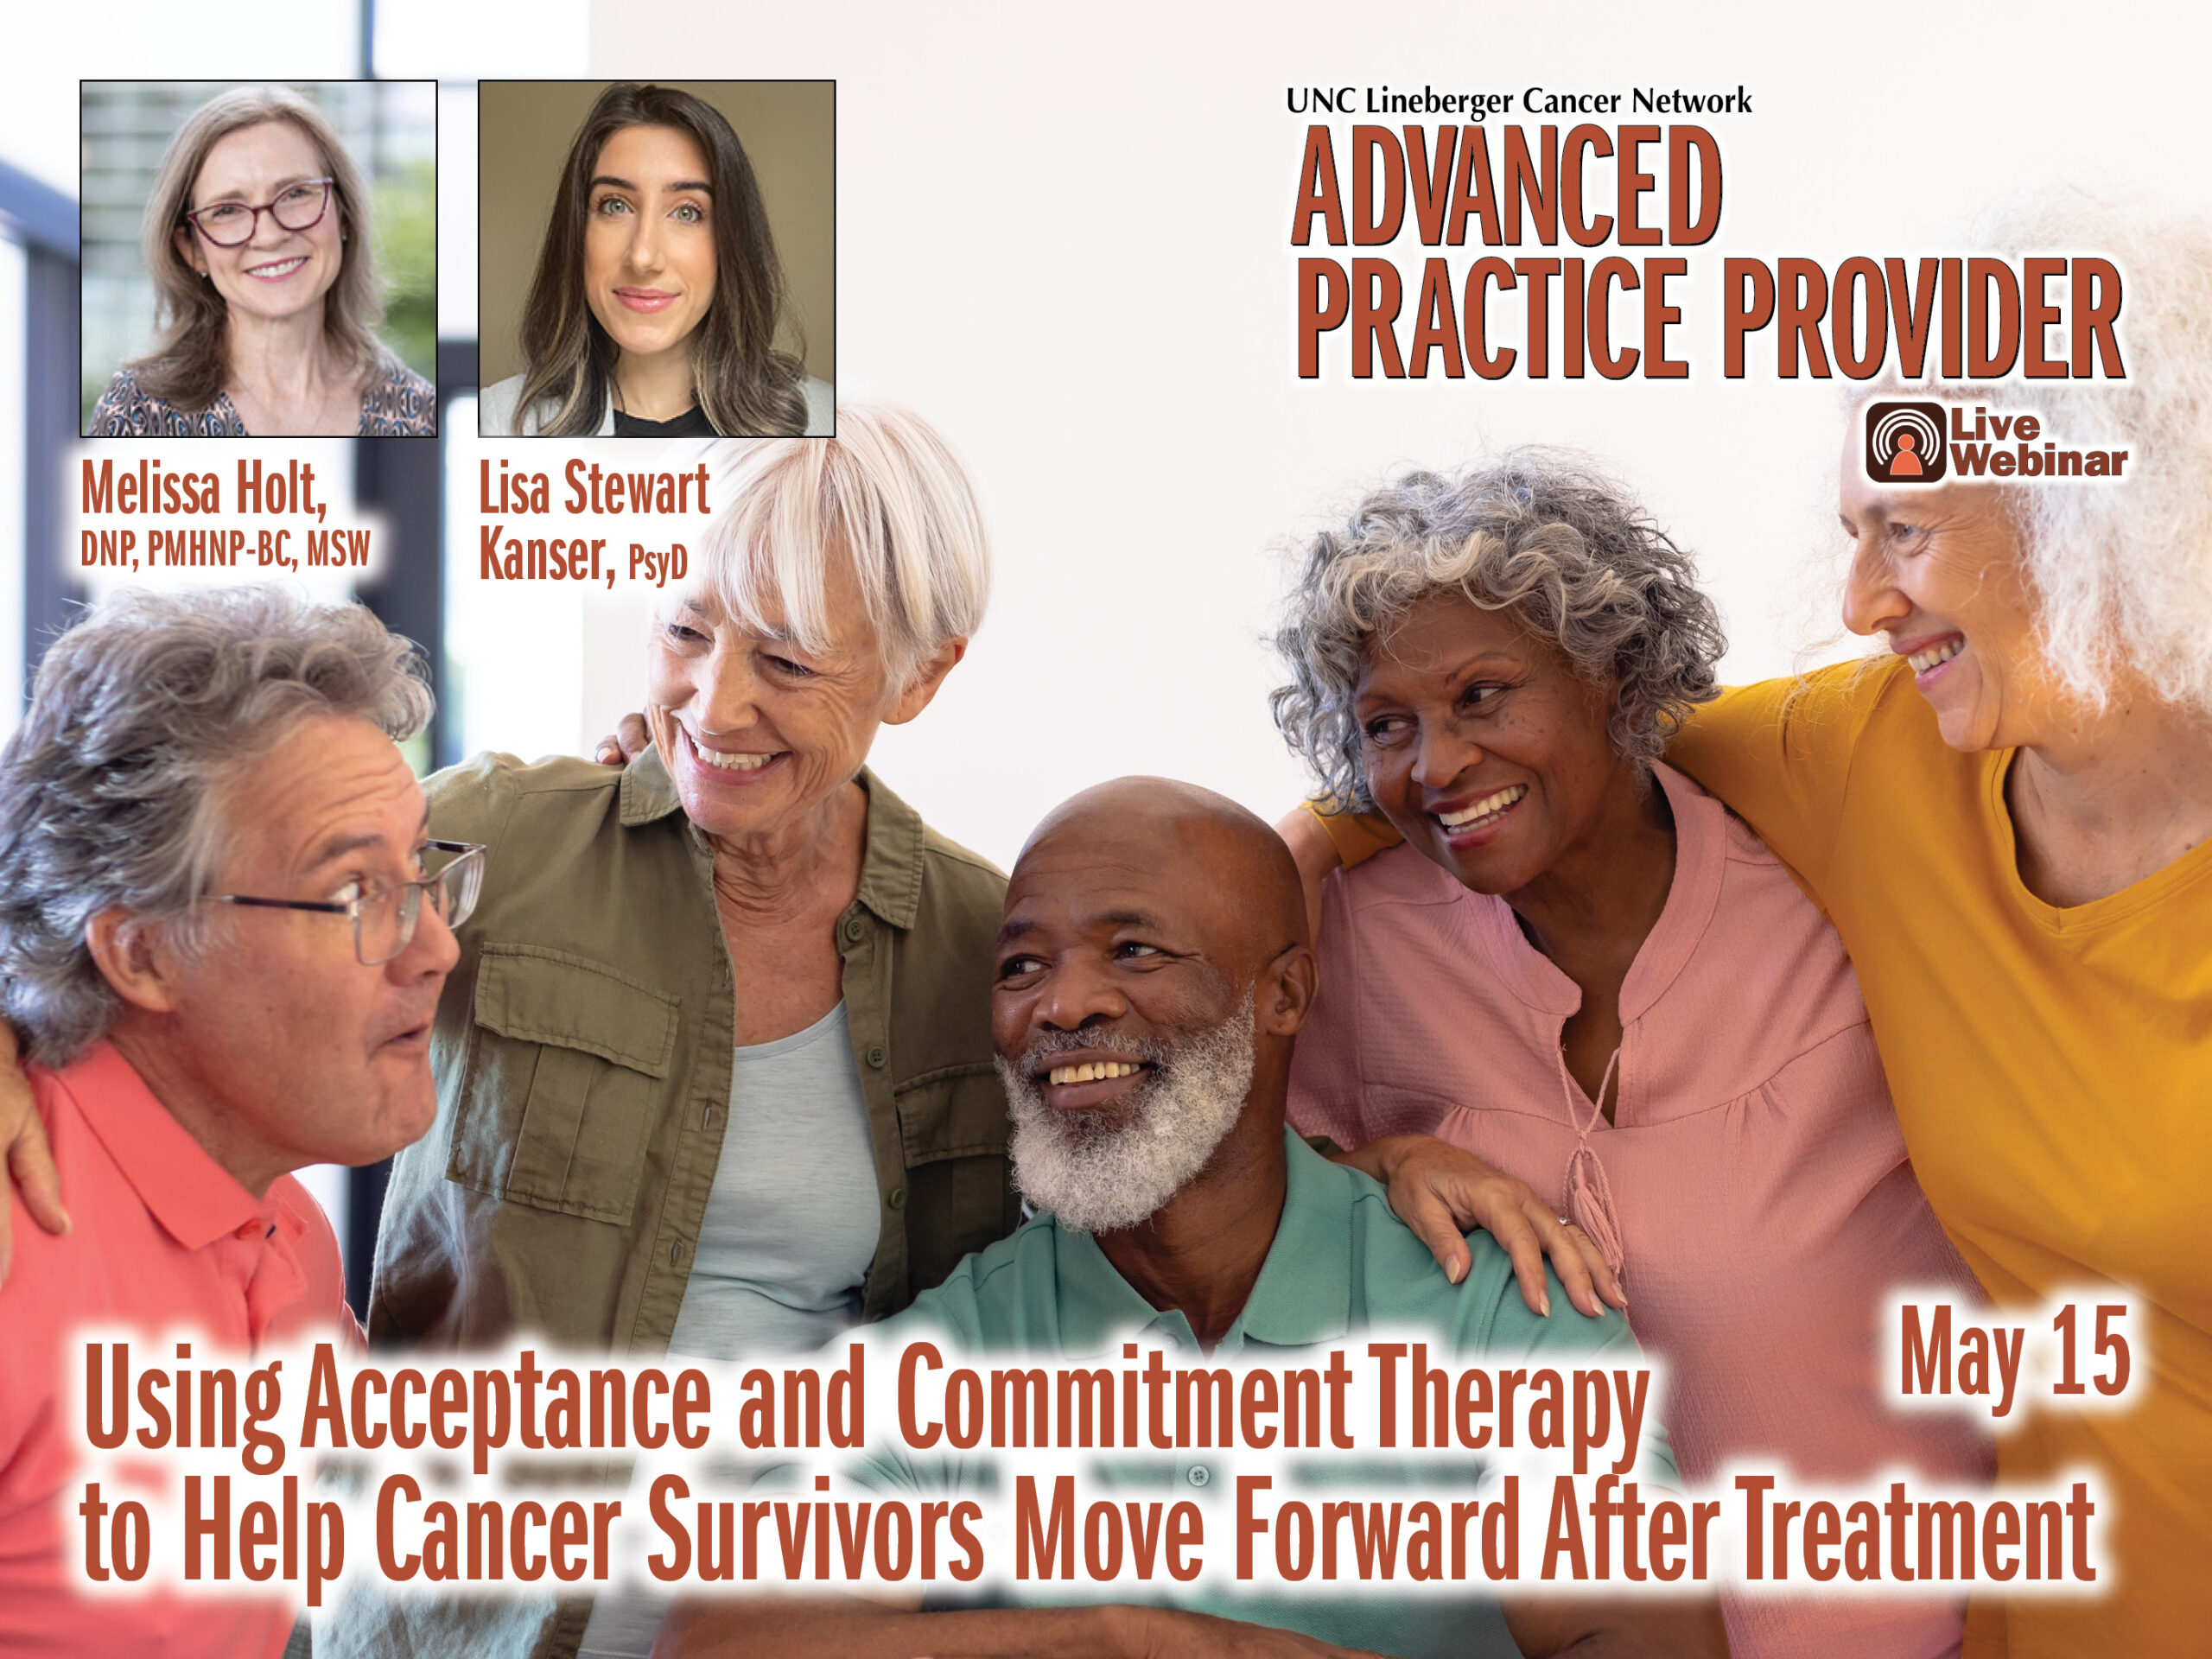 Using Acceptance and Commitment Therapy to Help Cancer Survivors Move Forward After Treatment